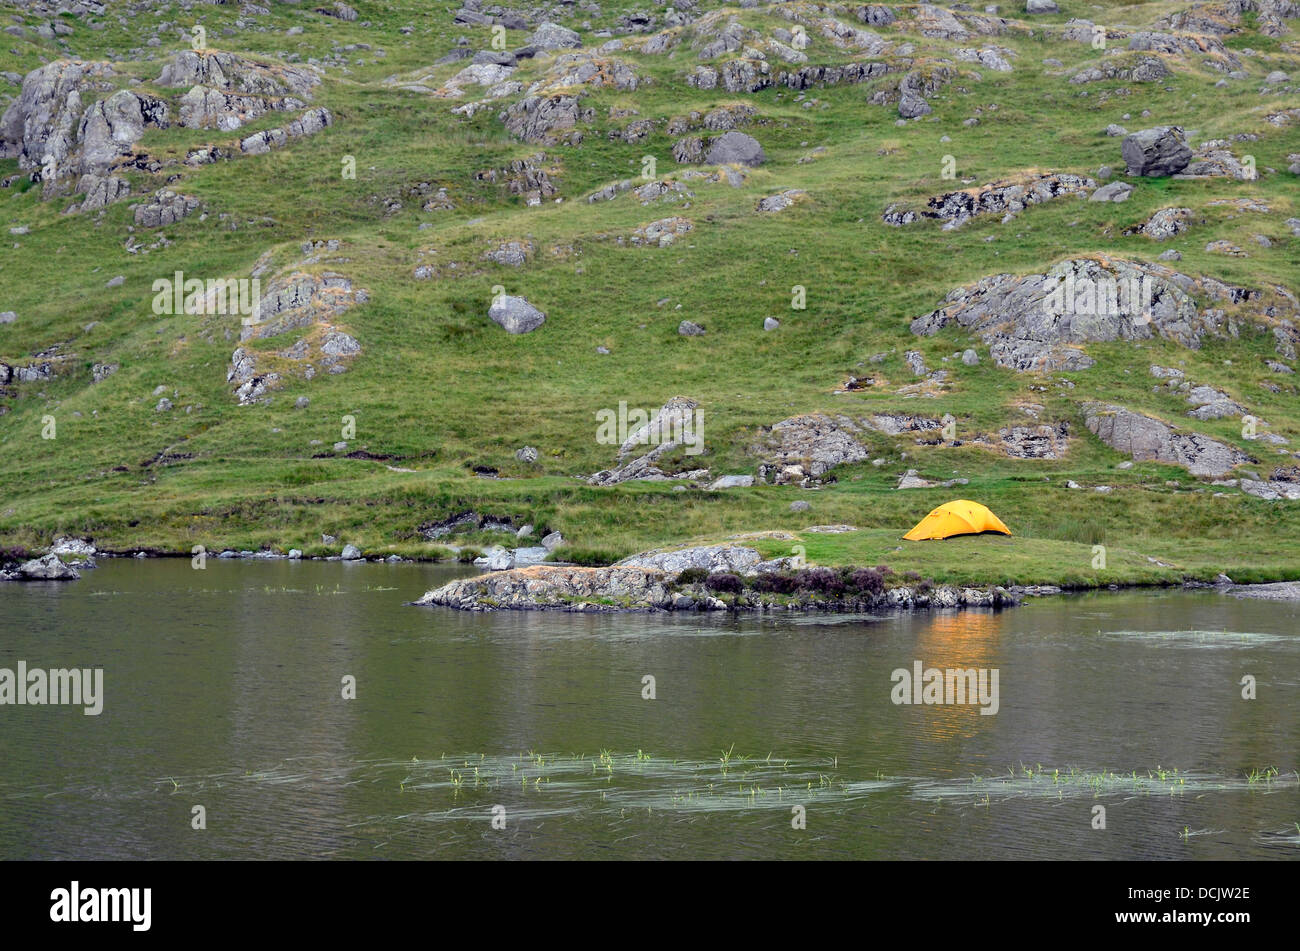 Wilderness camping Stickle Tarn, popular tourist spot above the Langdale valley in the Lake District National Park. Stock Photo